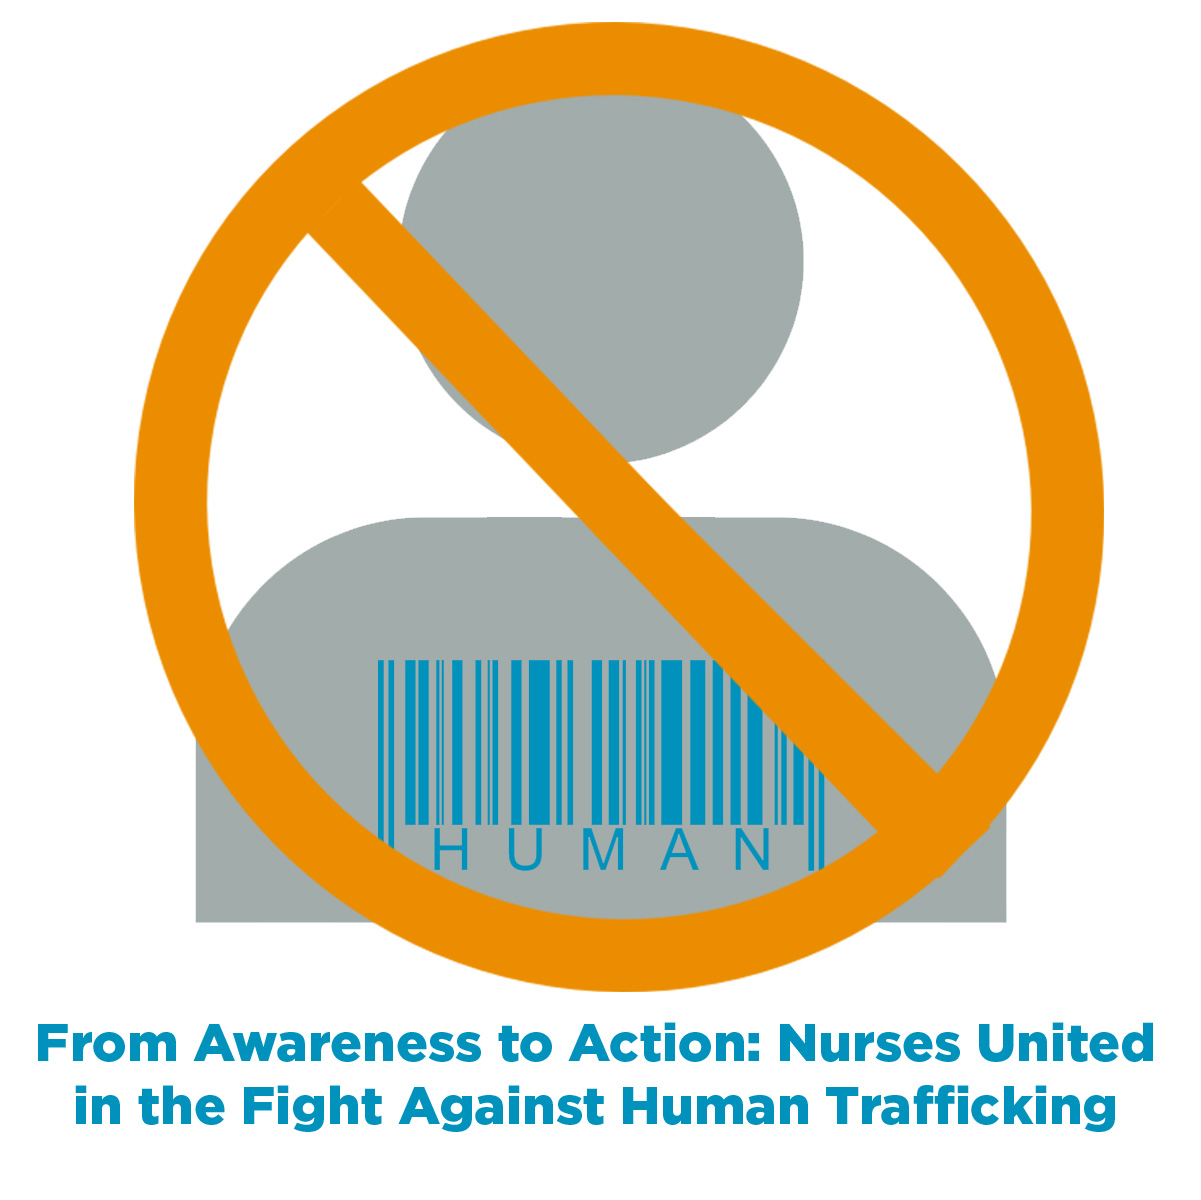 From Awareness to Action: Nurses United in the Fight Against Human Trafficking